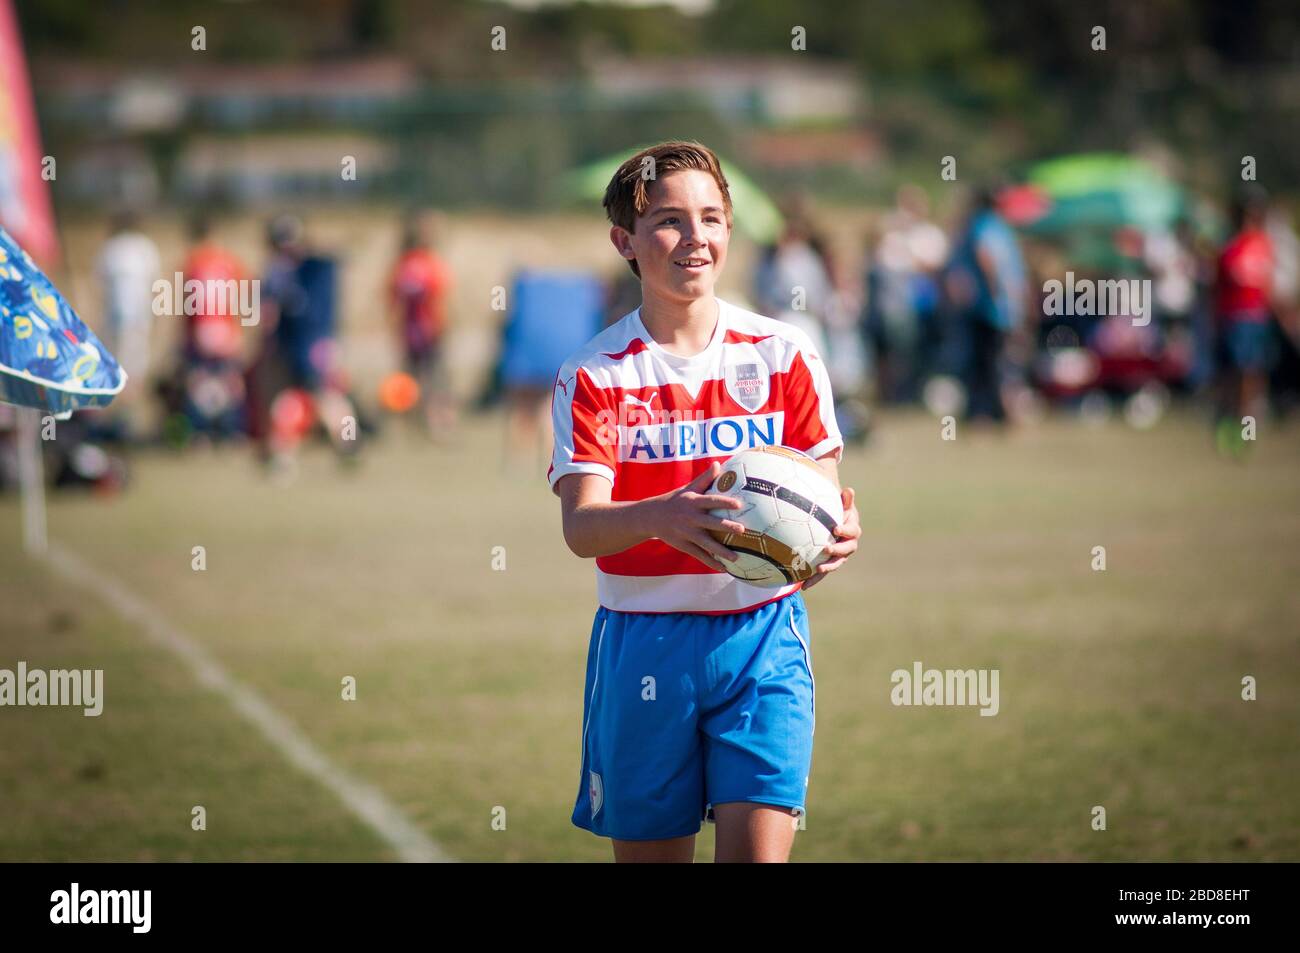 Teen soccer player smiling, holding ball and ready for a throw in Stock Photo